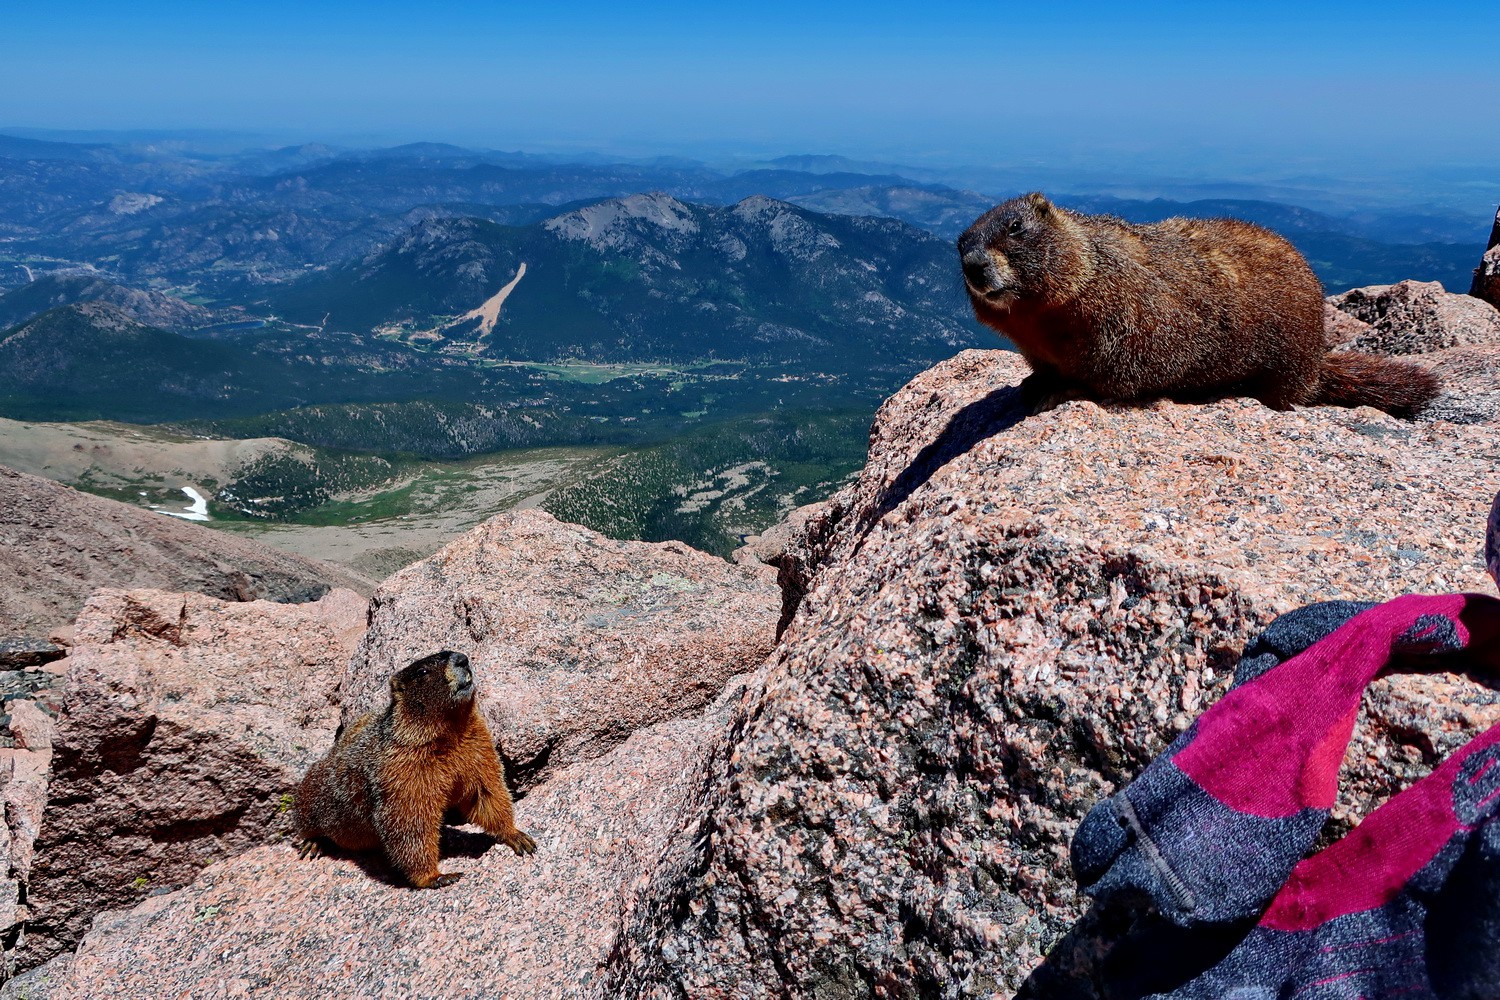 More Marmots are coming and checking my socks - very smelly!